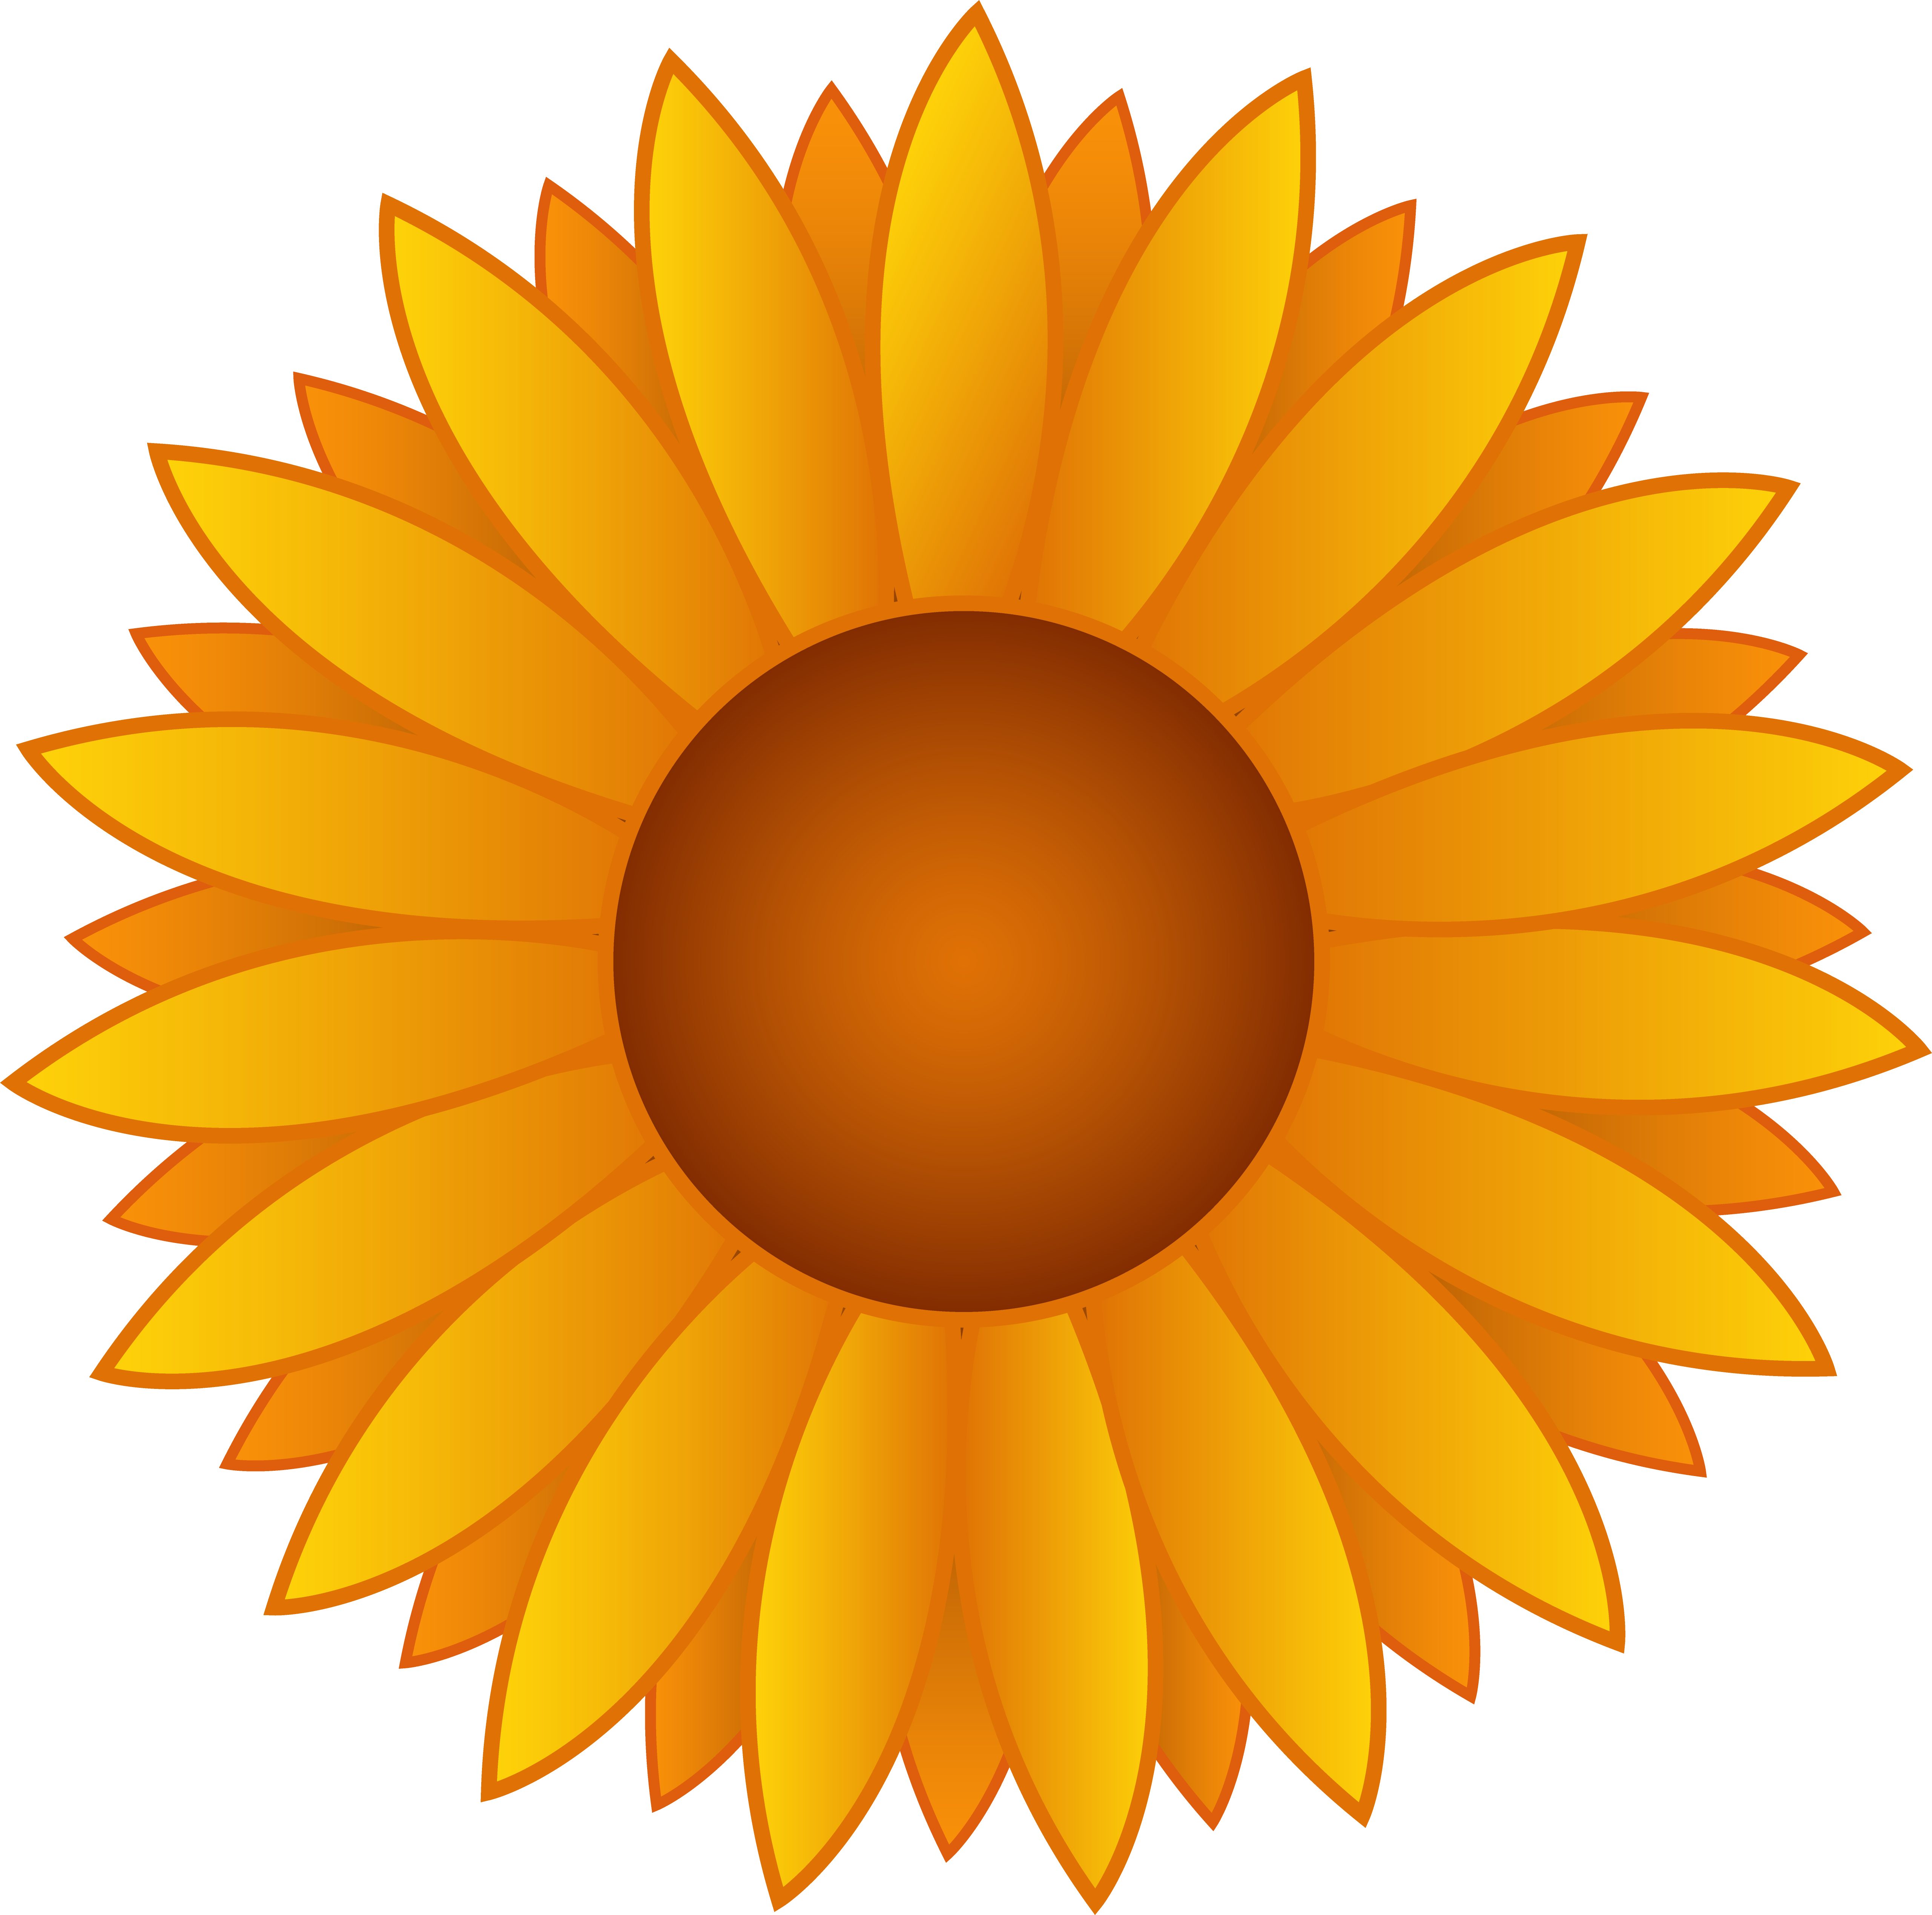 Sunflower clipart without background